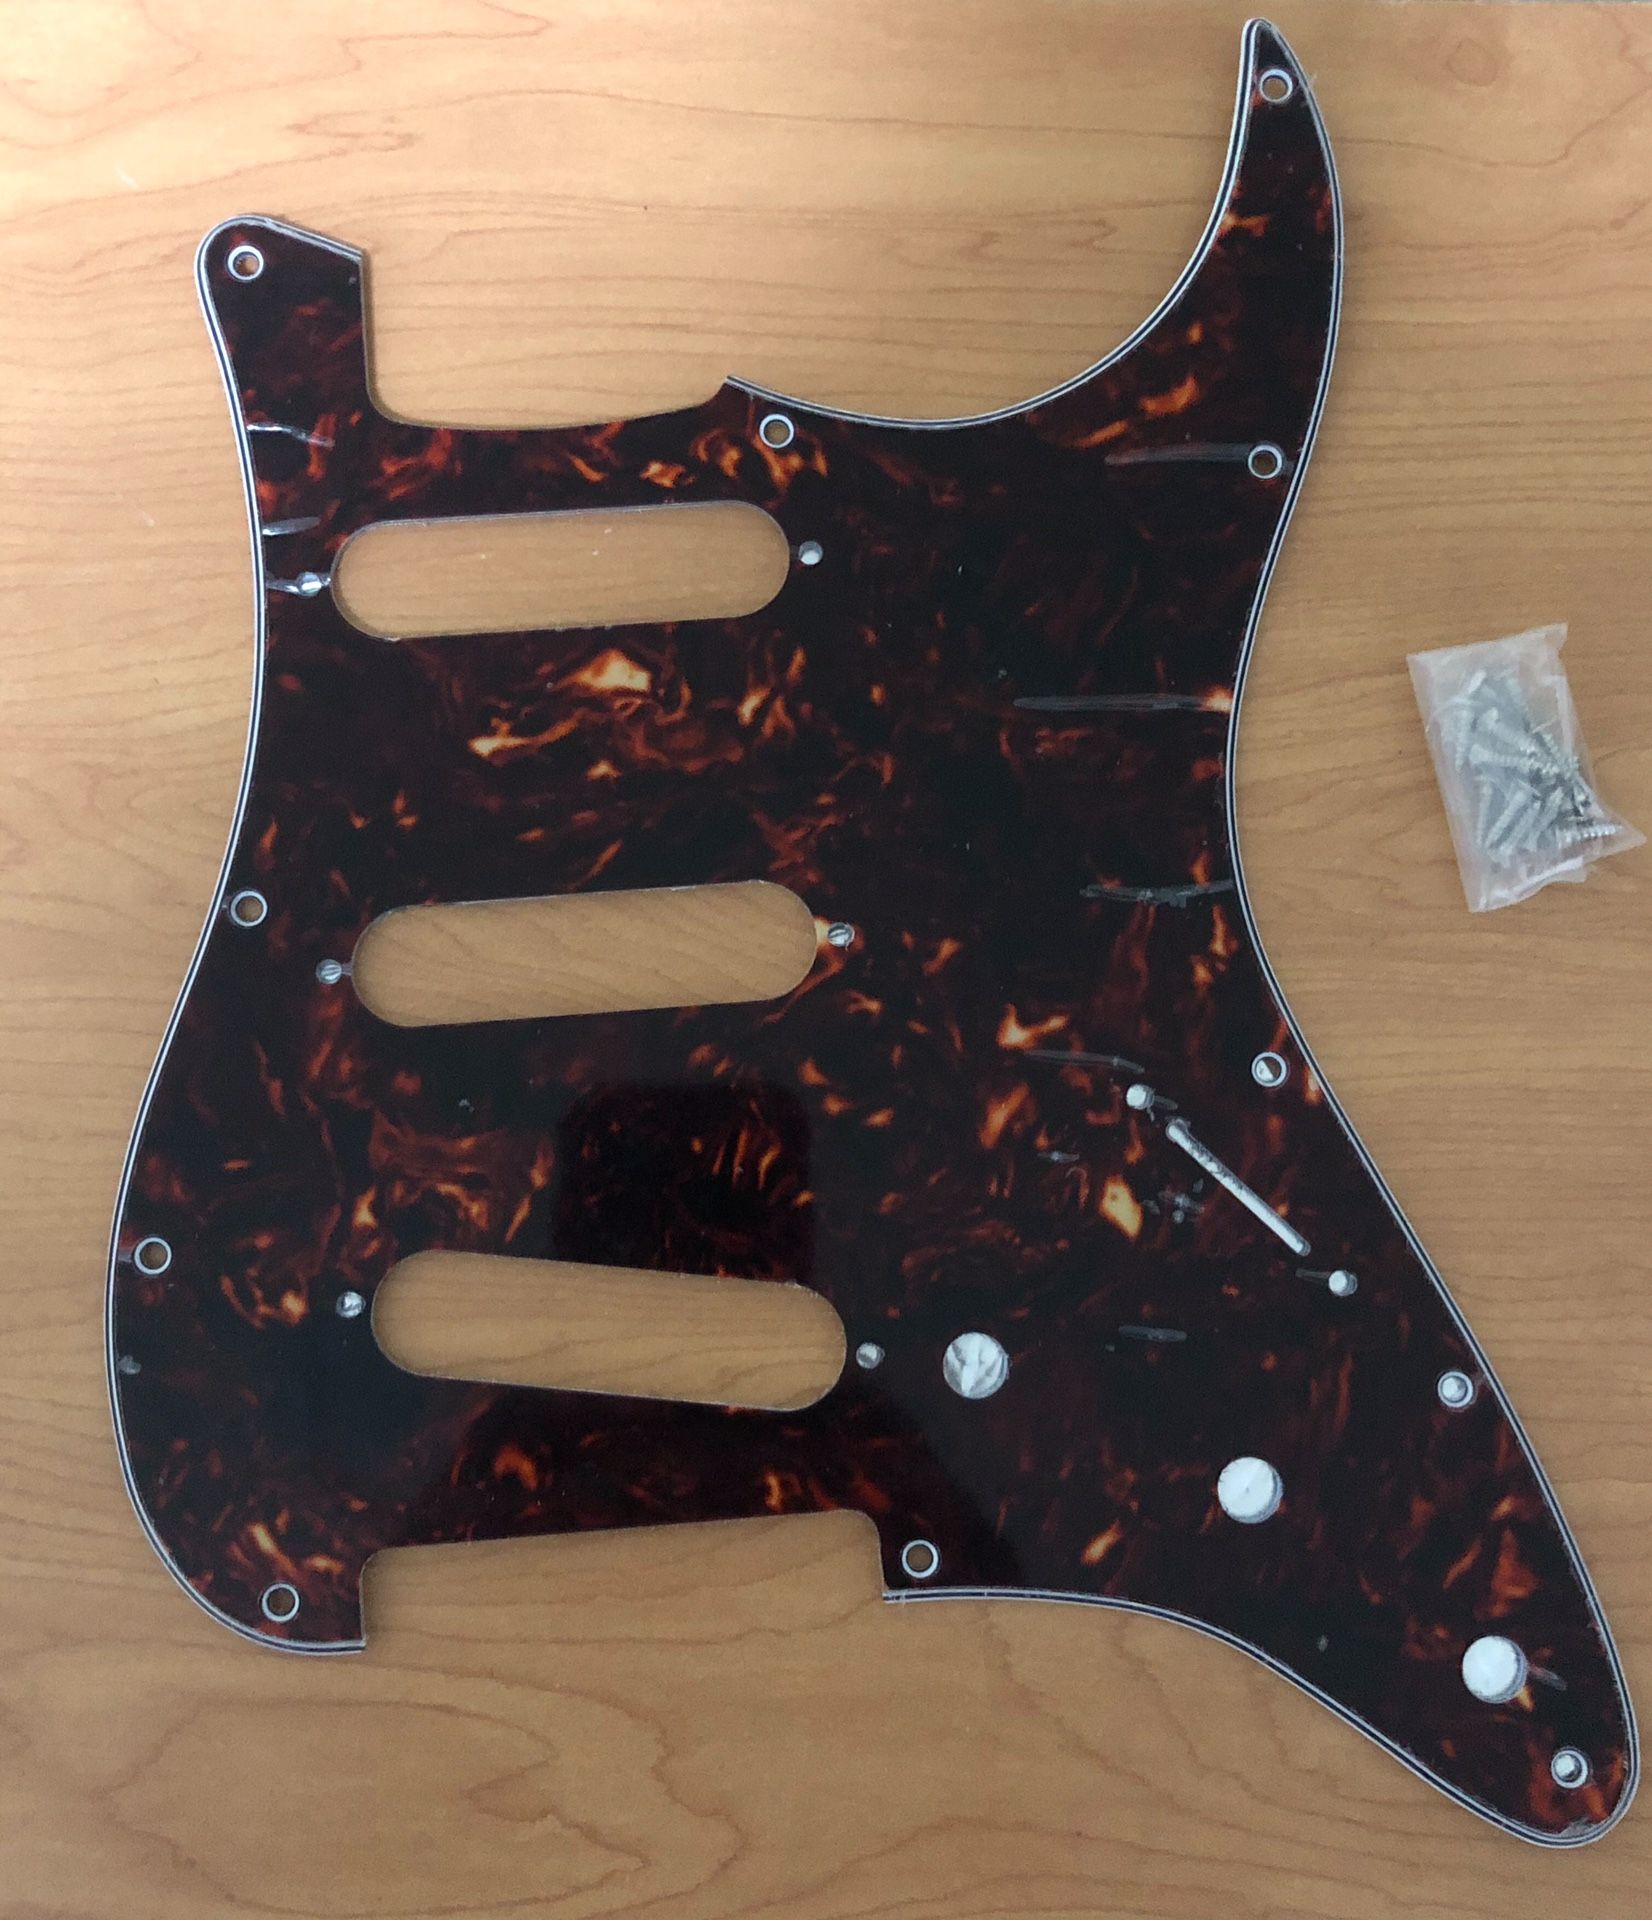 Brown/Red Tortoise 4-Play 11 Hole Pickguard with screws, fits Fender or Squier Strat SSS guitar, brand new with protective seal, bass, amp, effects